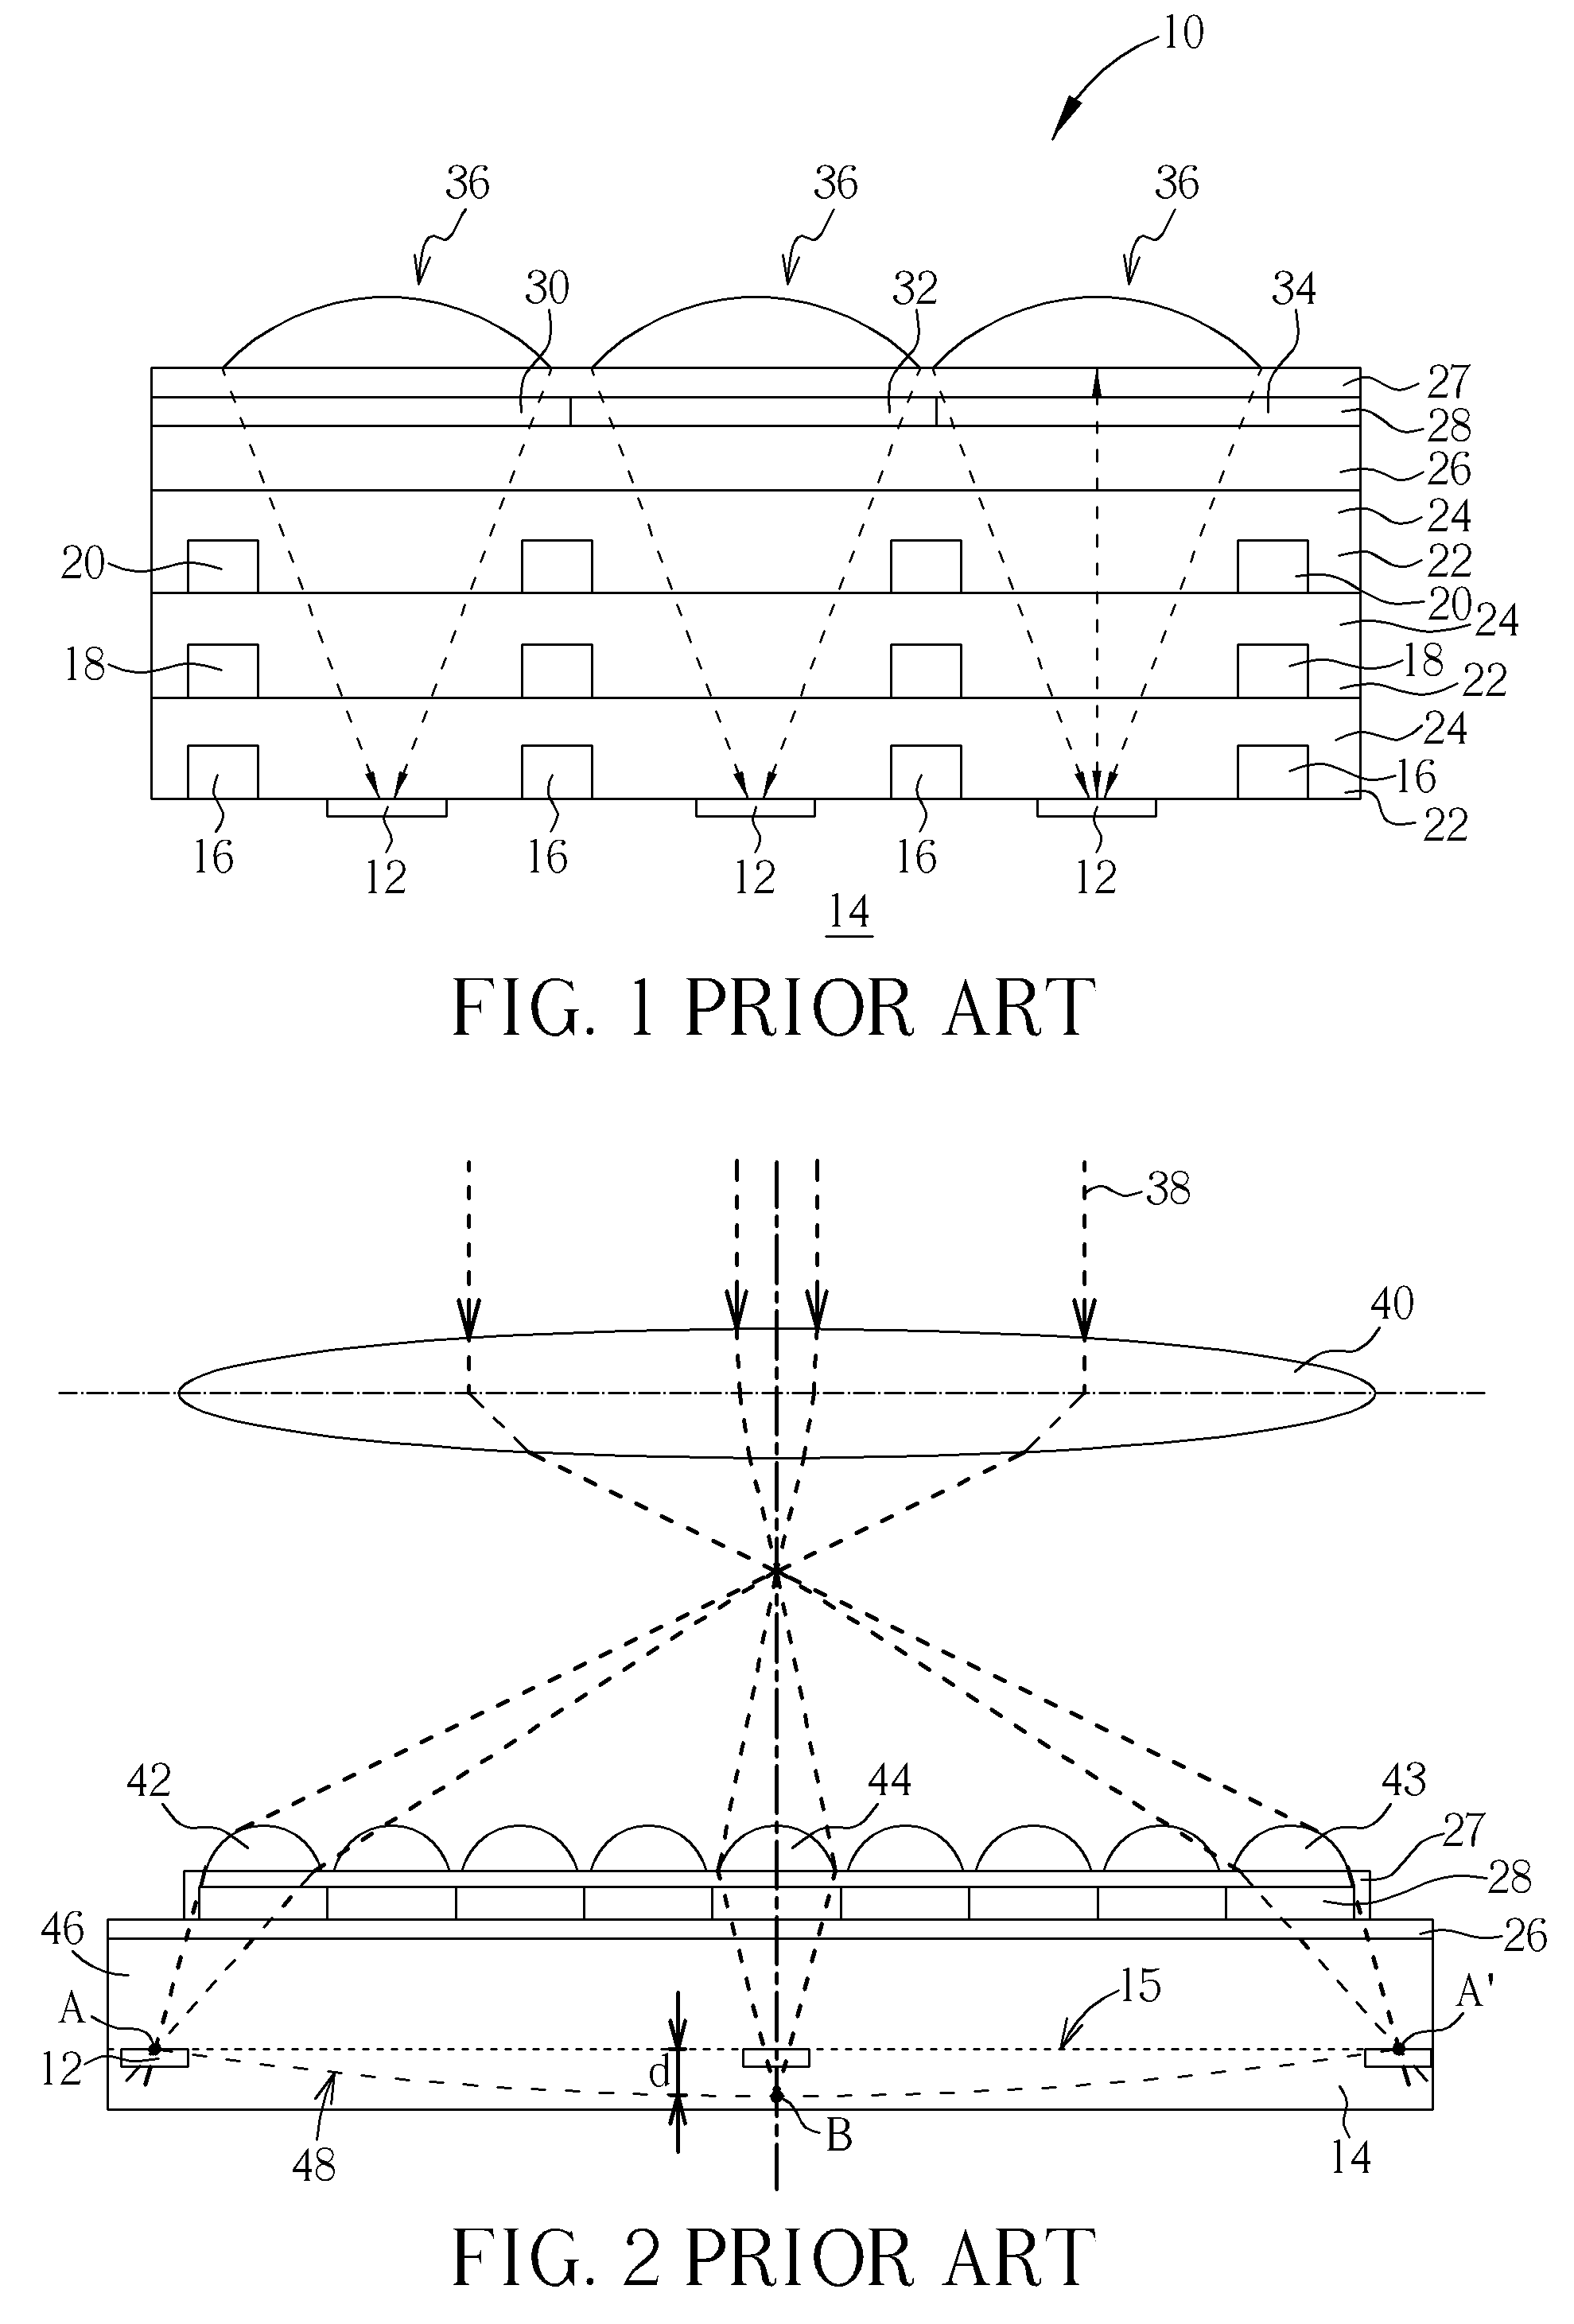 Image sensor structure with different pitches or shapes of microlenses